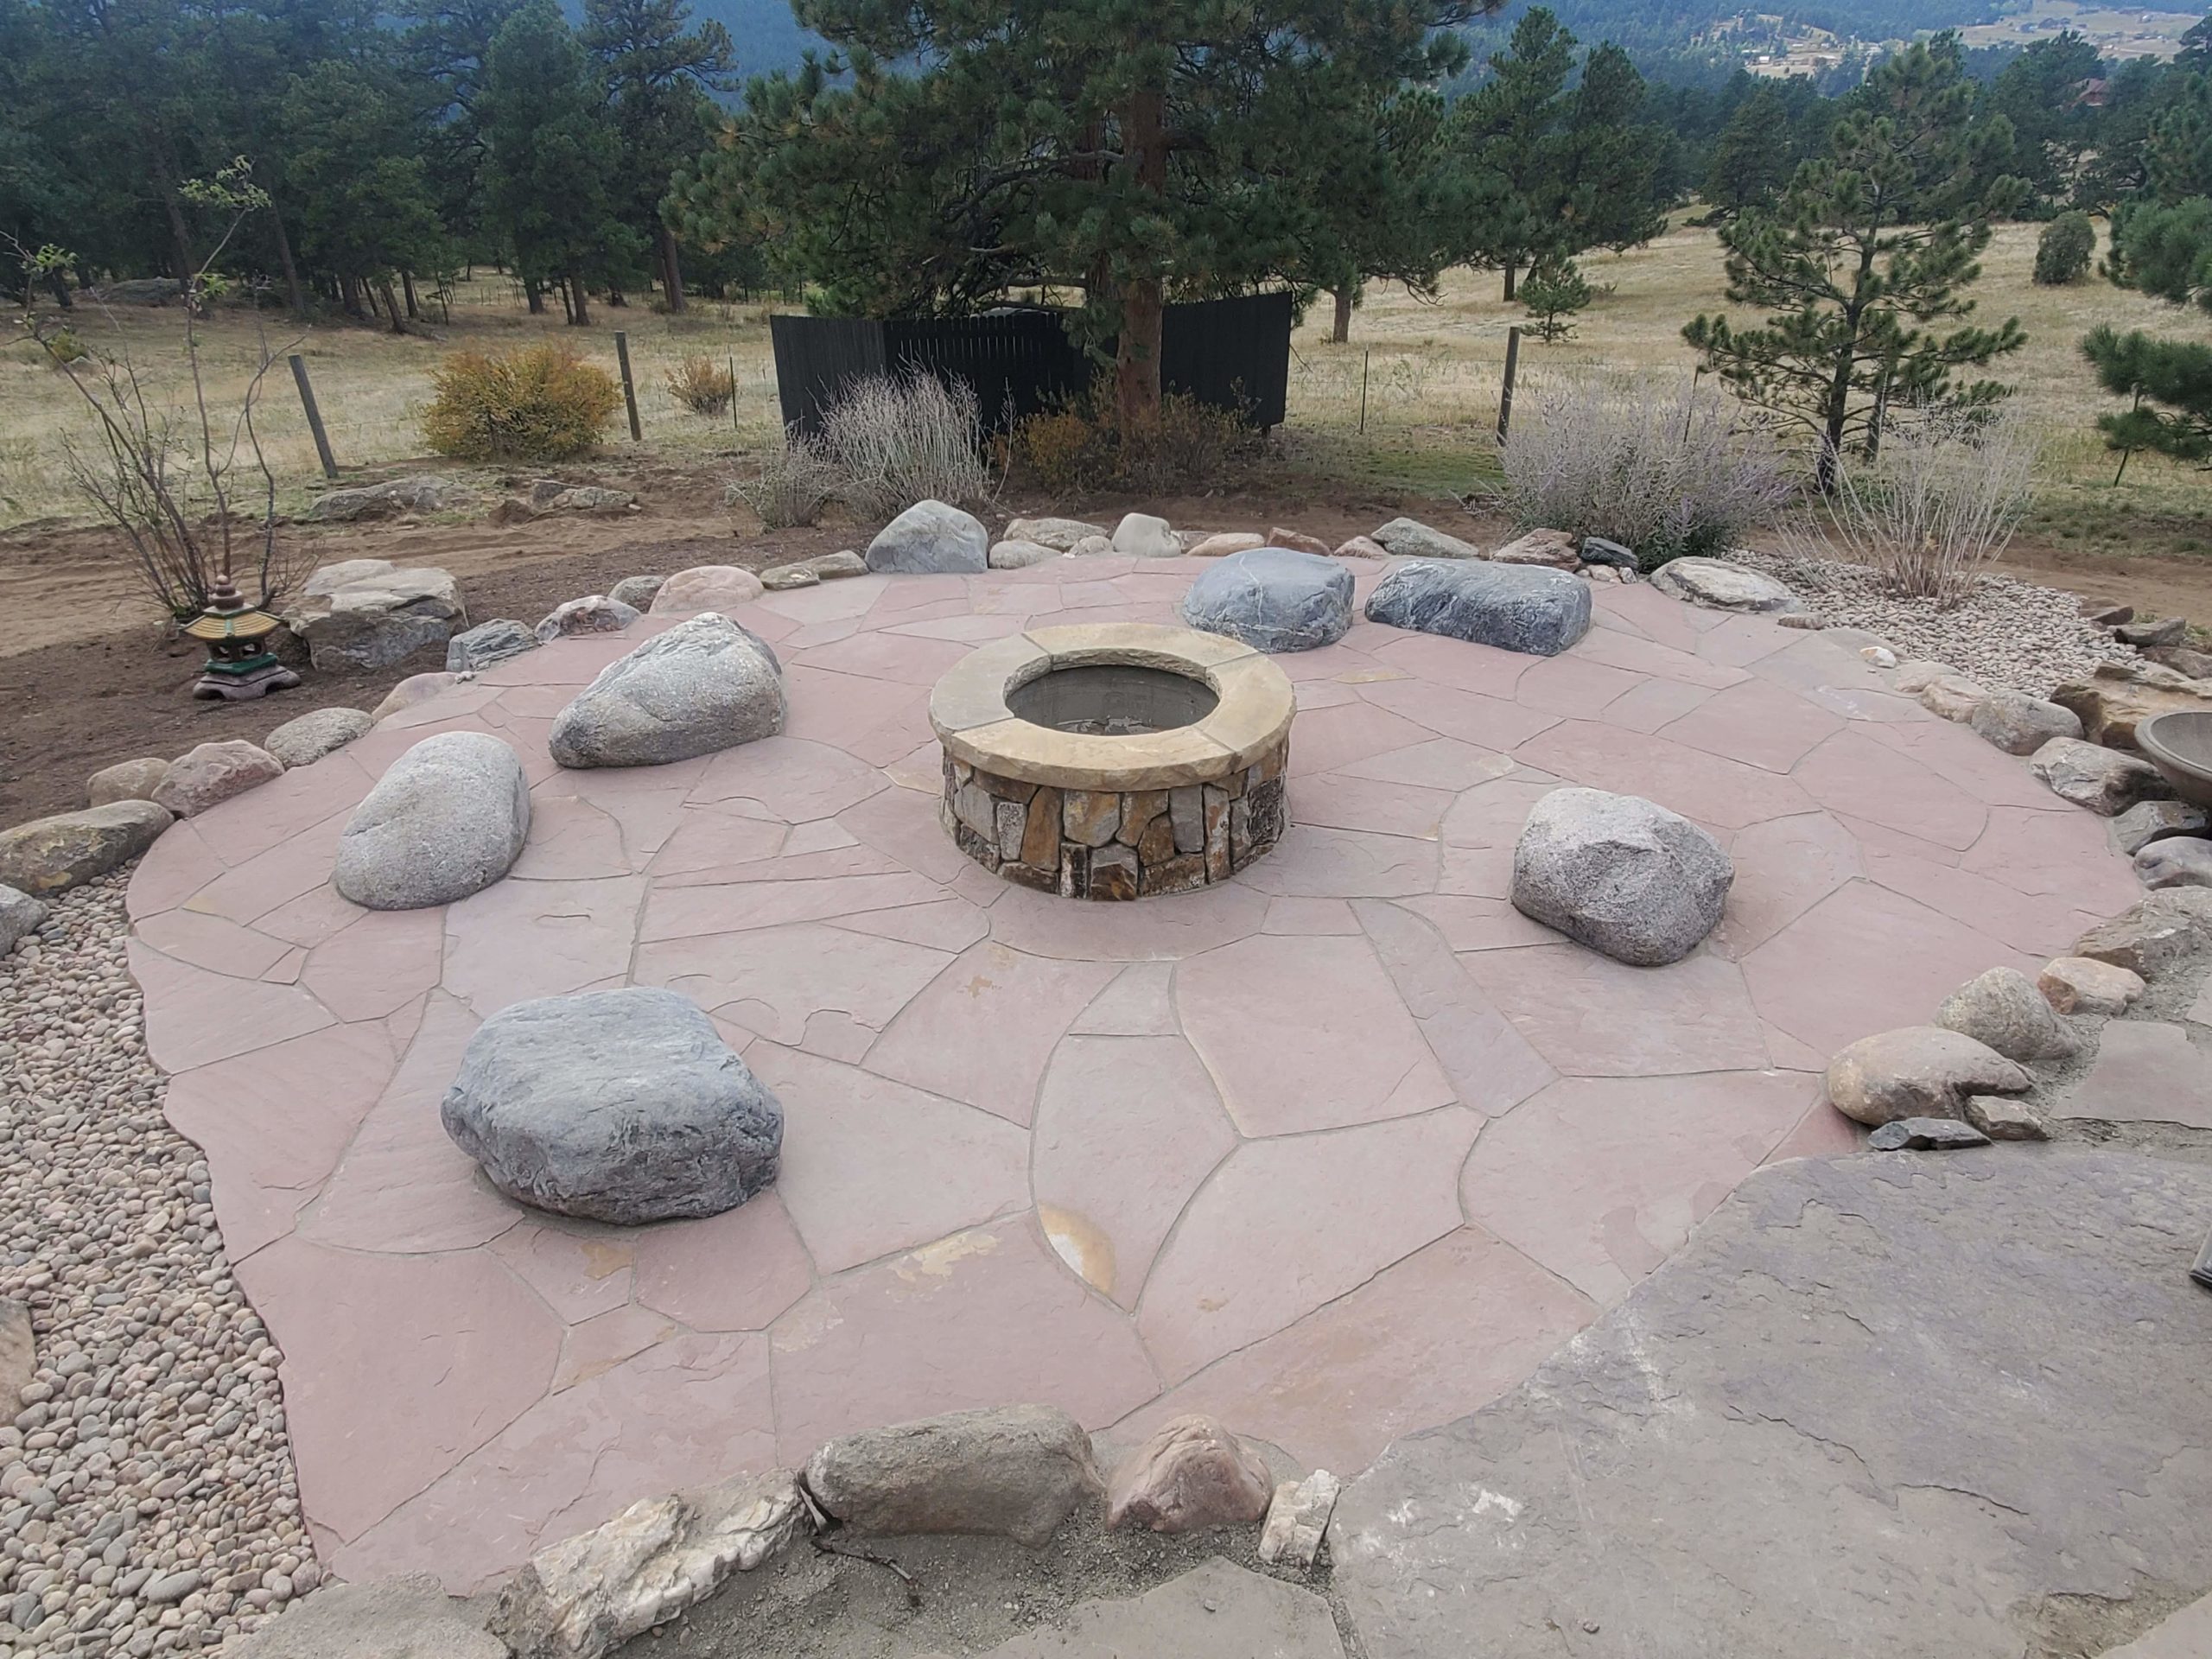 Red rock patio with stone fireplace in center, with large river rock benches